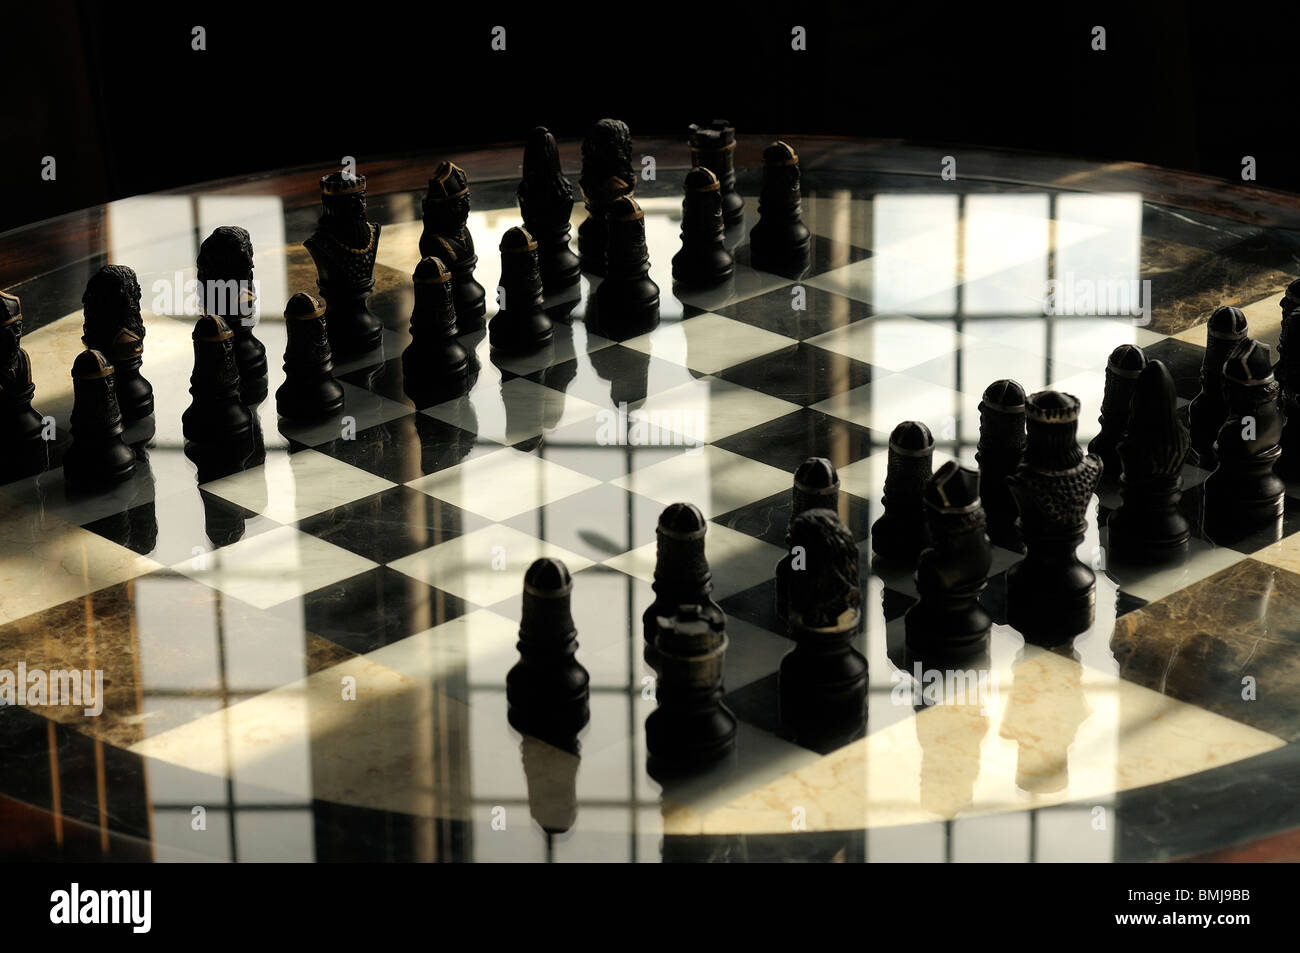 Chess board with window reflections Stock Photo